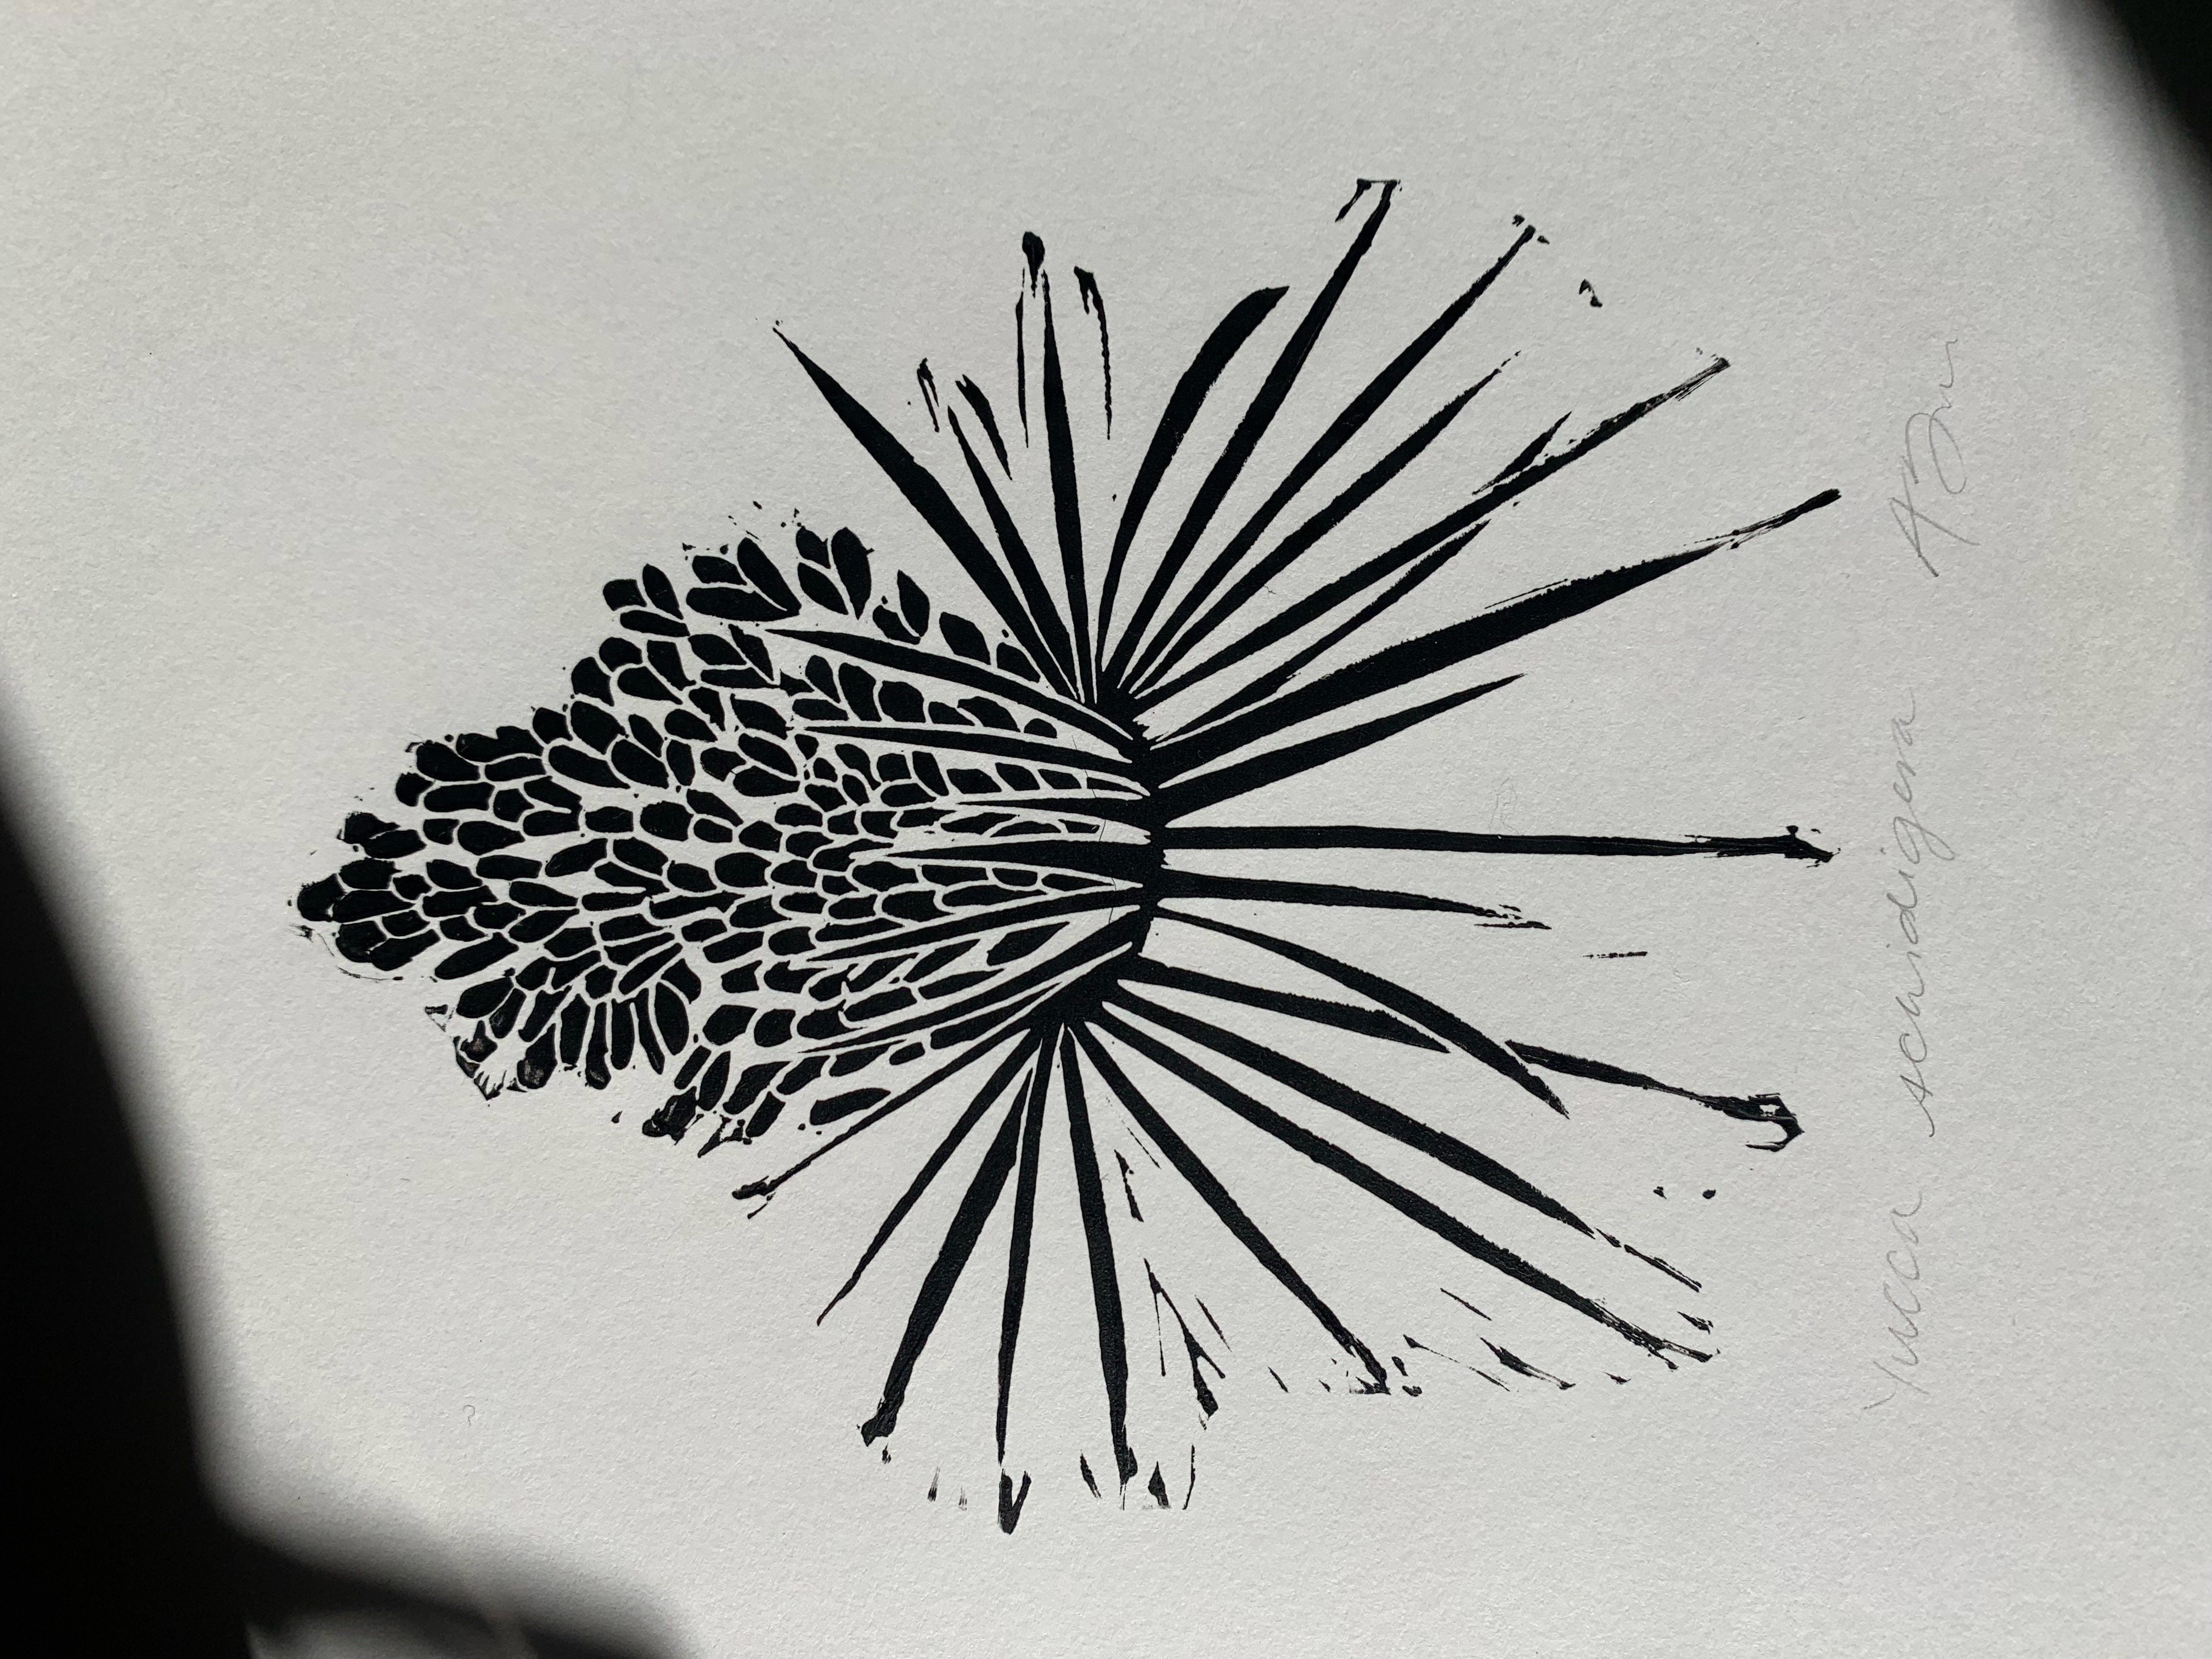 Block print of Yucca on white paper in black ink partially obscured by shadows.